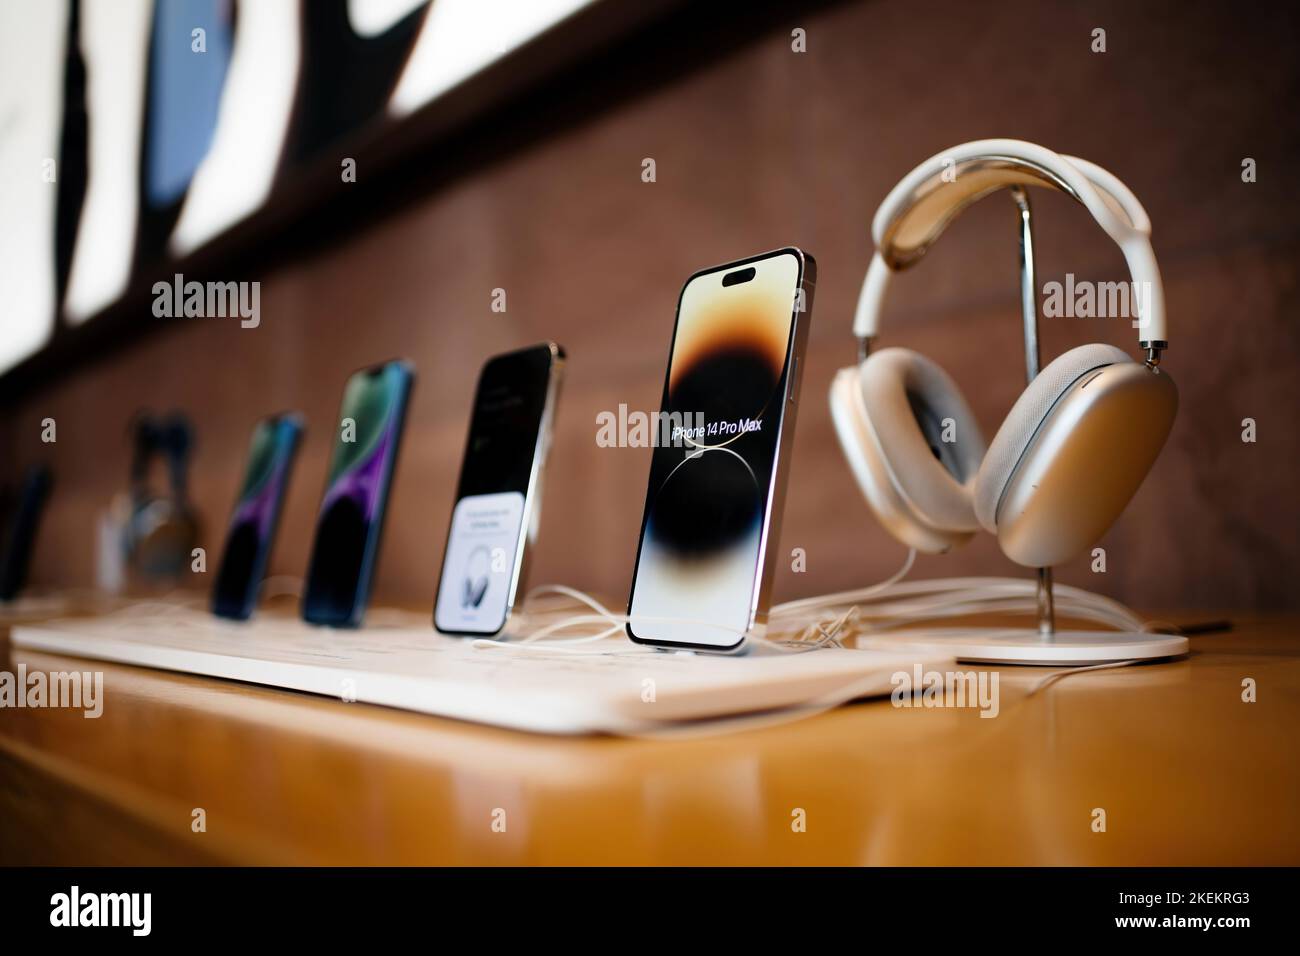 Paris, France - Oct 28, 2022: Row of all current line of Apple Computers iPhone smartphone - focus on 14 pro Max telephones with silver AirPods Max headphones Stock Photo